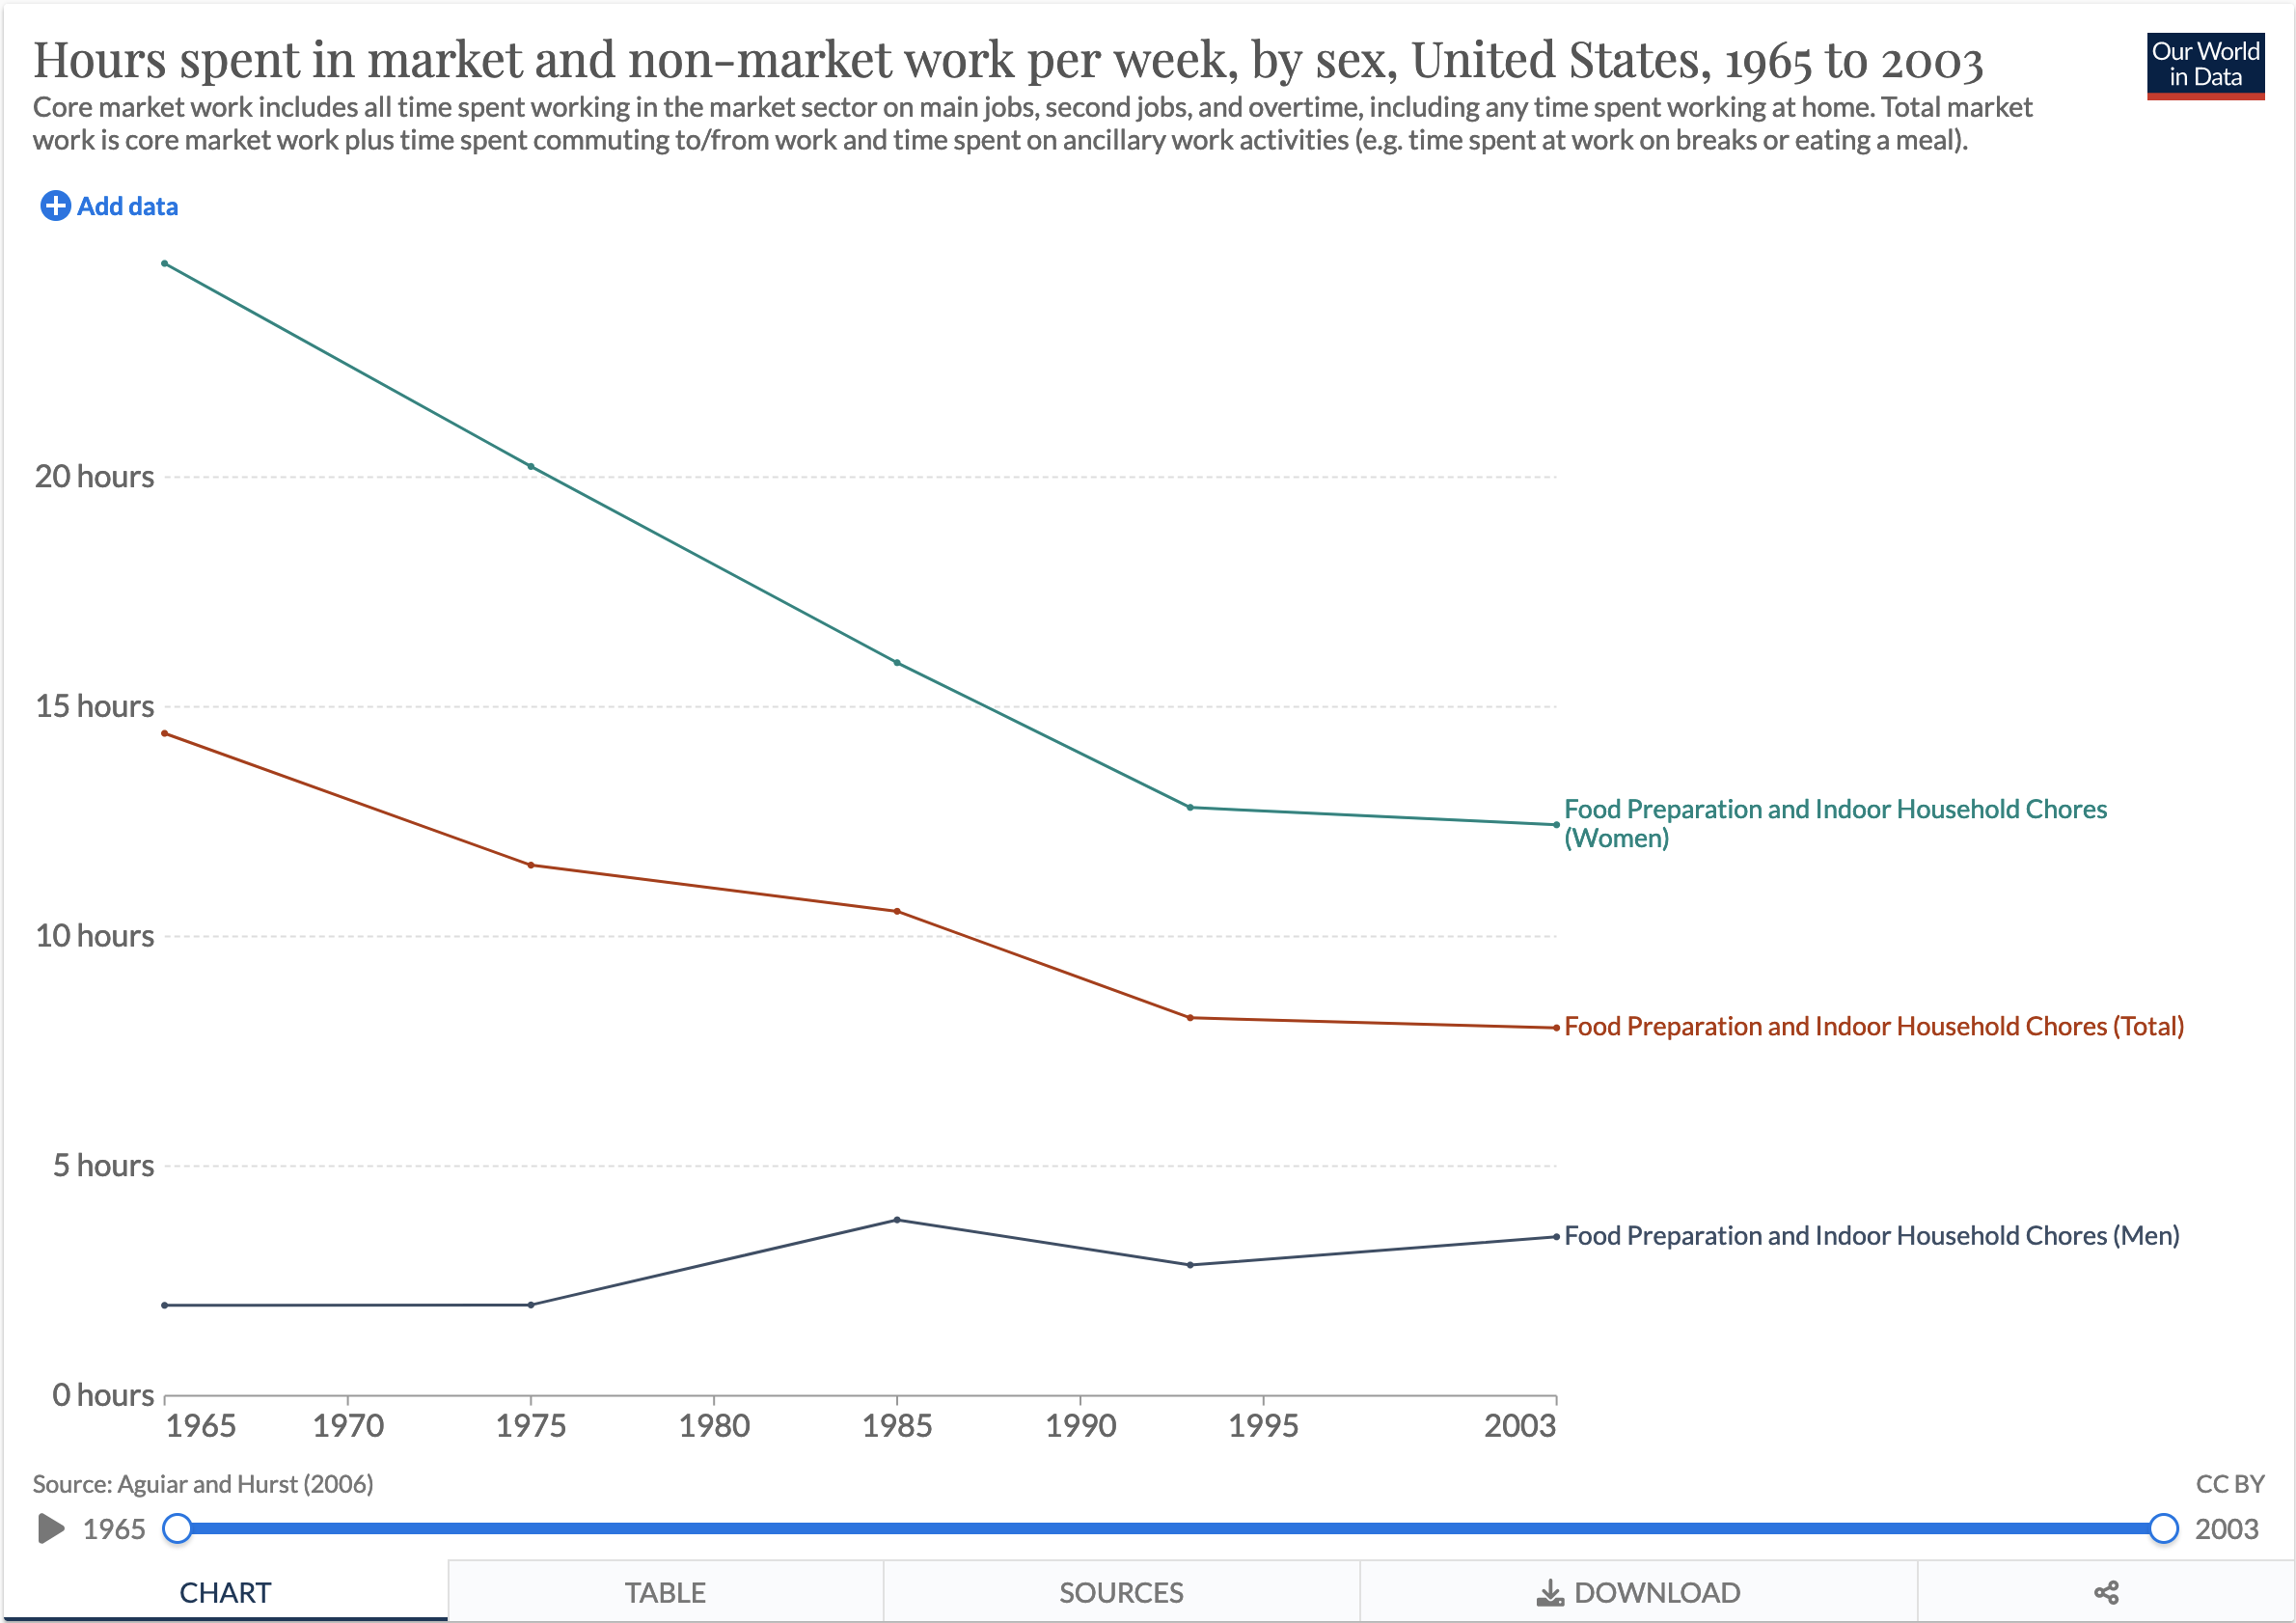 Historically, household chores took a huge amount of time. Source: [The World in our Data](https://ourworldindata.org/grapher/hours-per-week-spent-in-market-and-non-market-work-by-sex-united-states?country=Food+Preparation+and+Indoor+Household+Chores+(Men)~Food+Preparation+and+Indoor+Household+Chores+(Total)~Food+Preparation+and+Indoor+Household+Chores+(Women))